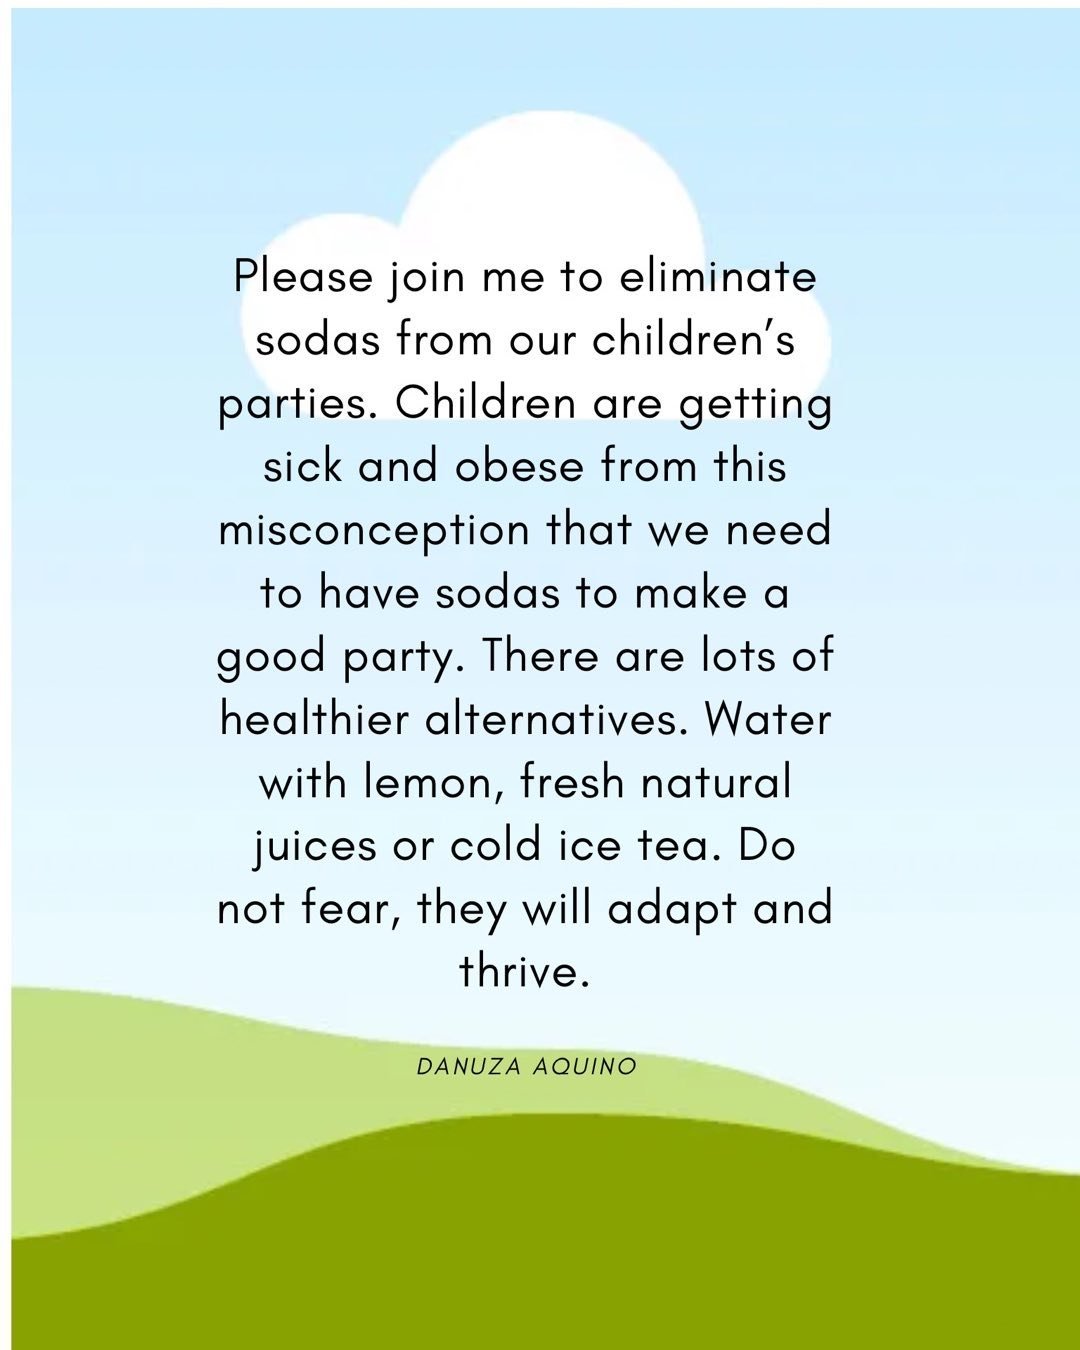 It is time to be serious about the health of our children. There is no need to be radical, however, if we work together, we can slowly change this horrible culture of buying sodas for our parties. If we change to healthier choices, children will adap